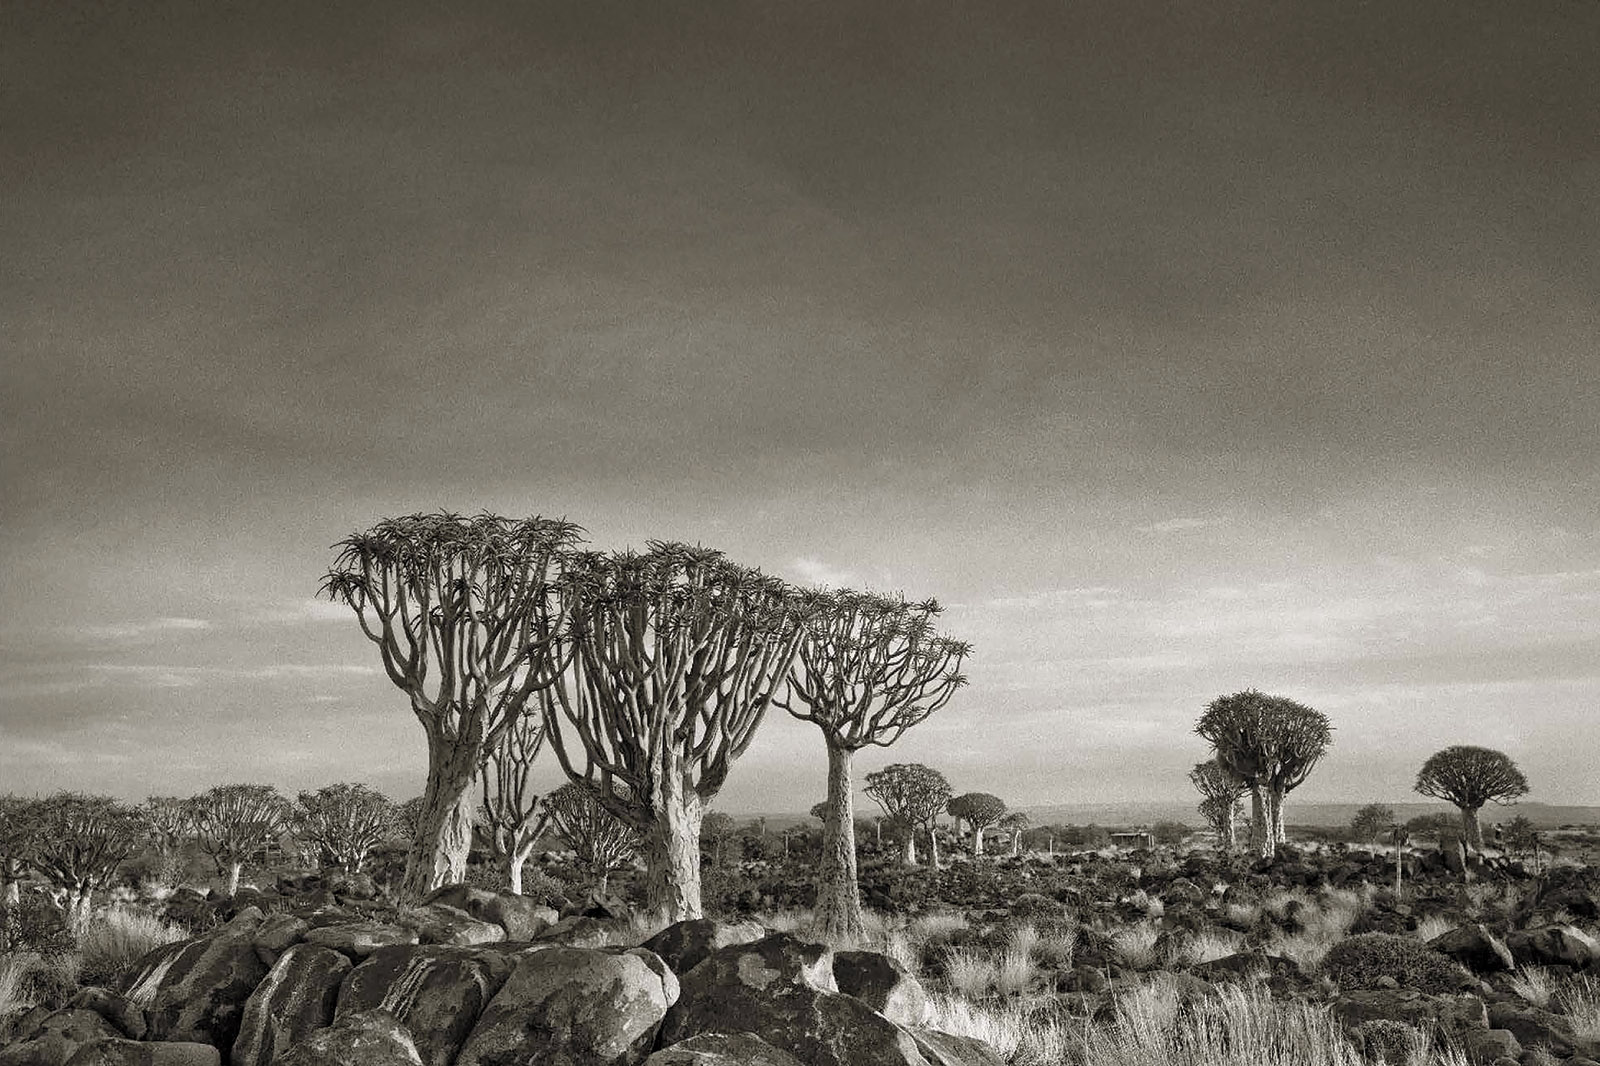 Quiver Tree Forest, Namibia; photograph by Beth Moon from her book Ancient Trees: Portraits of Time (2014). A collection of her color photographs, Ancient Skies, Ancient Trees, has just been published by Abbeville.